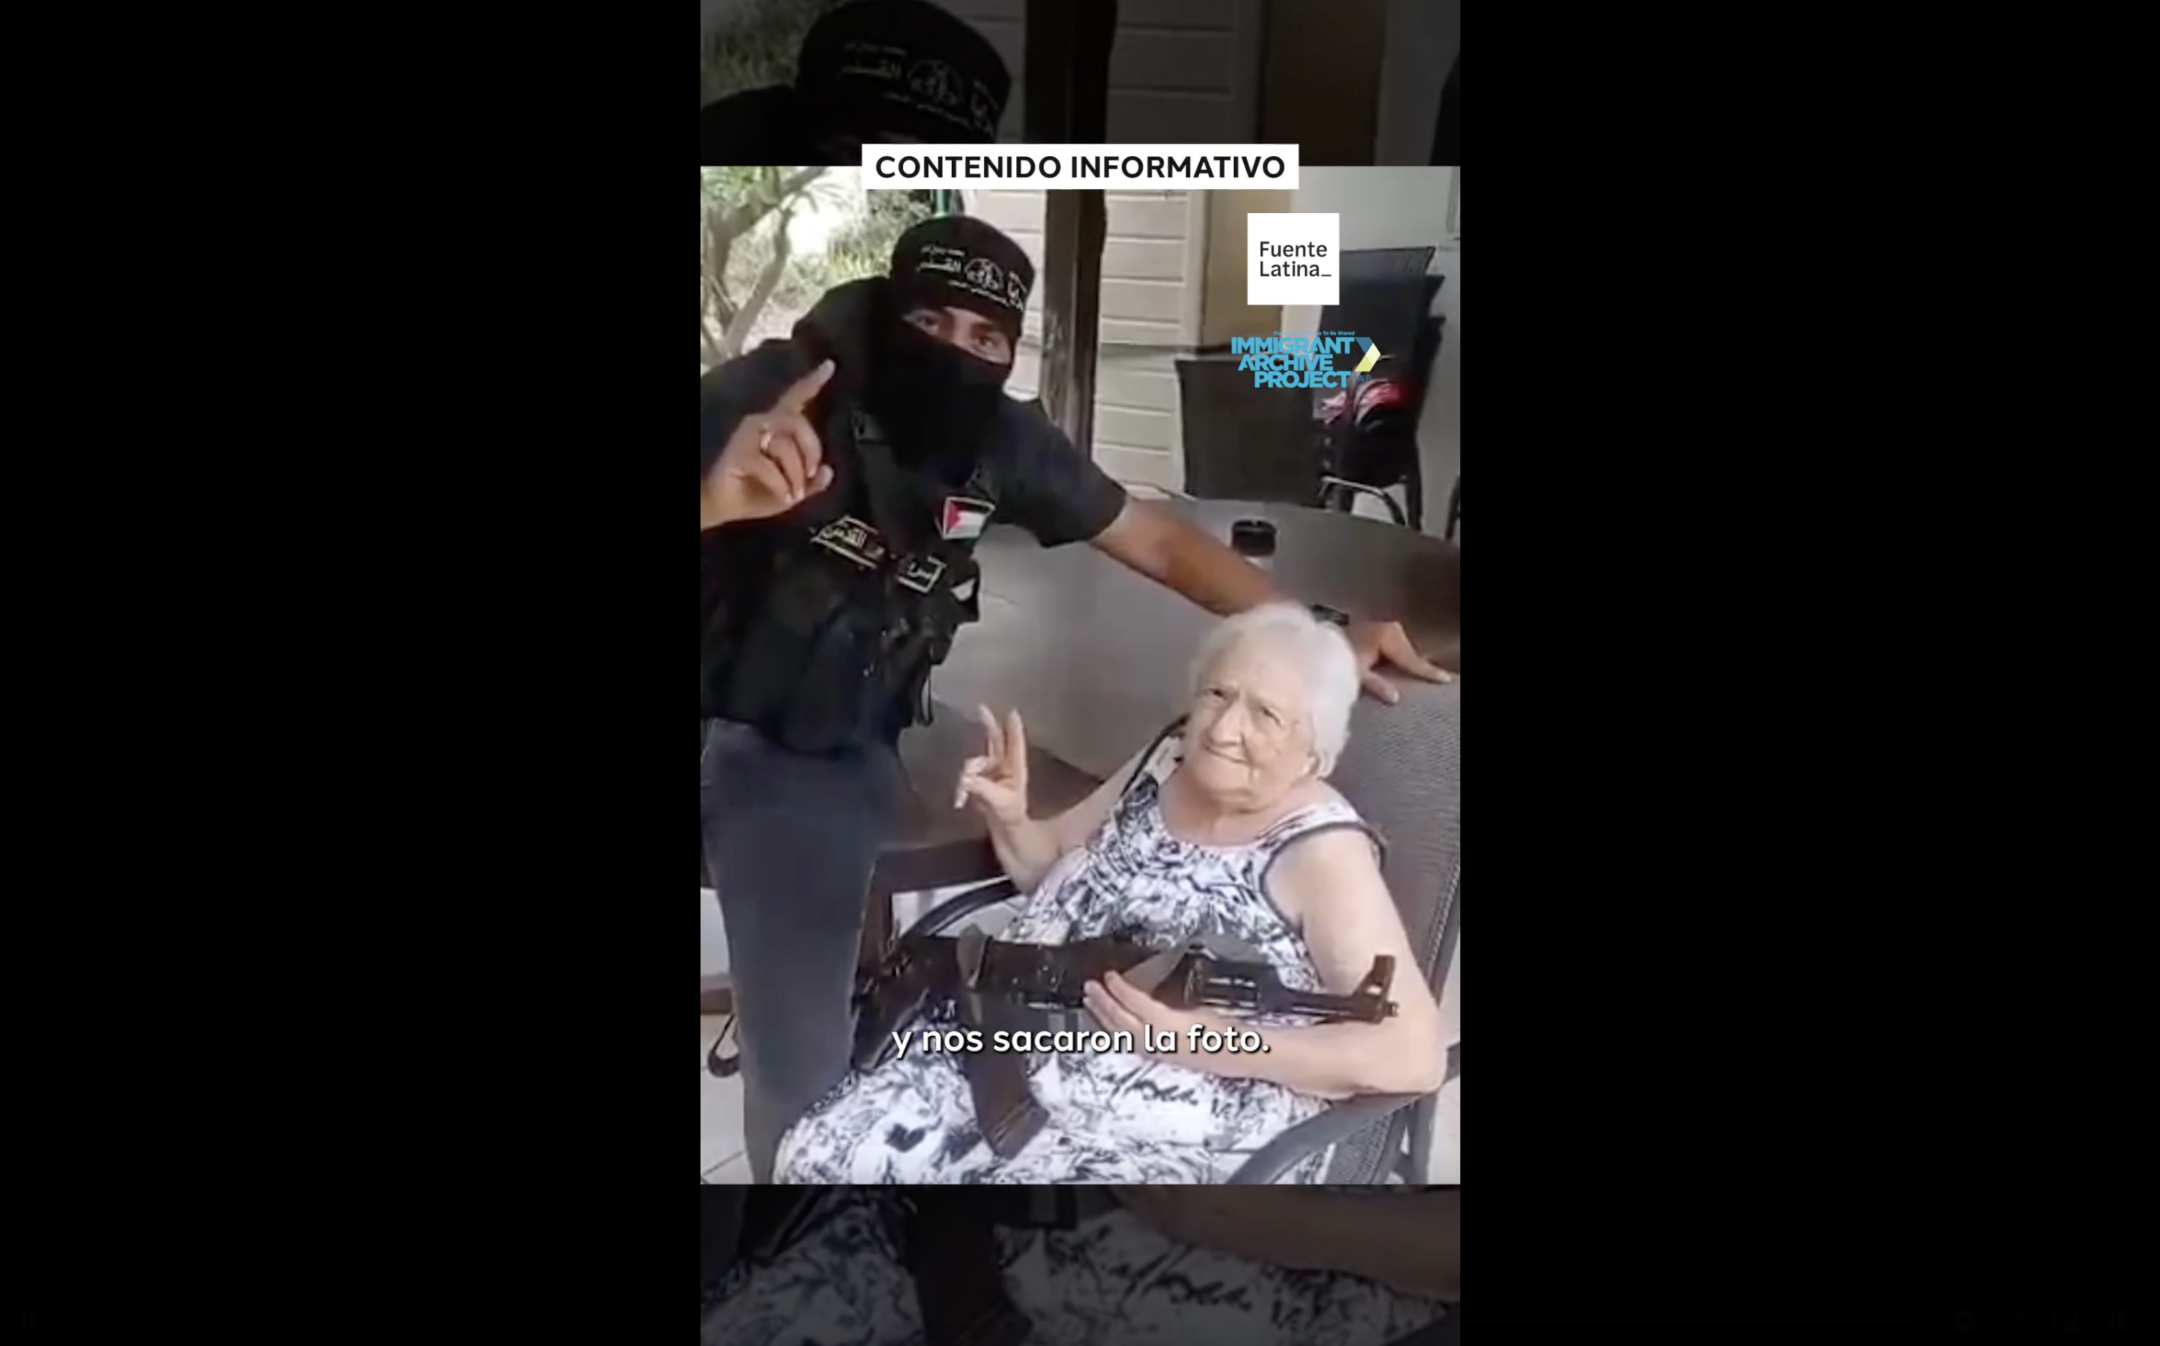 90-year-old Ester Cunio says in a new Fuente Latino documentary that she bonded with a Hamas terrorist over the soccer star Lionel Messi on Oct. 7. (Screenshot)